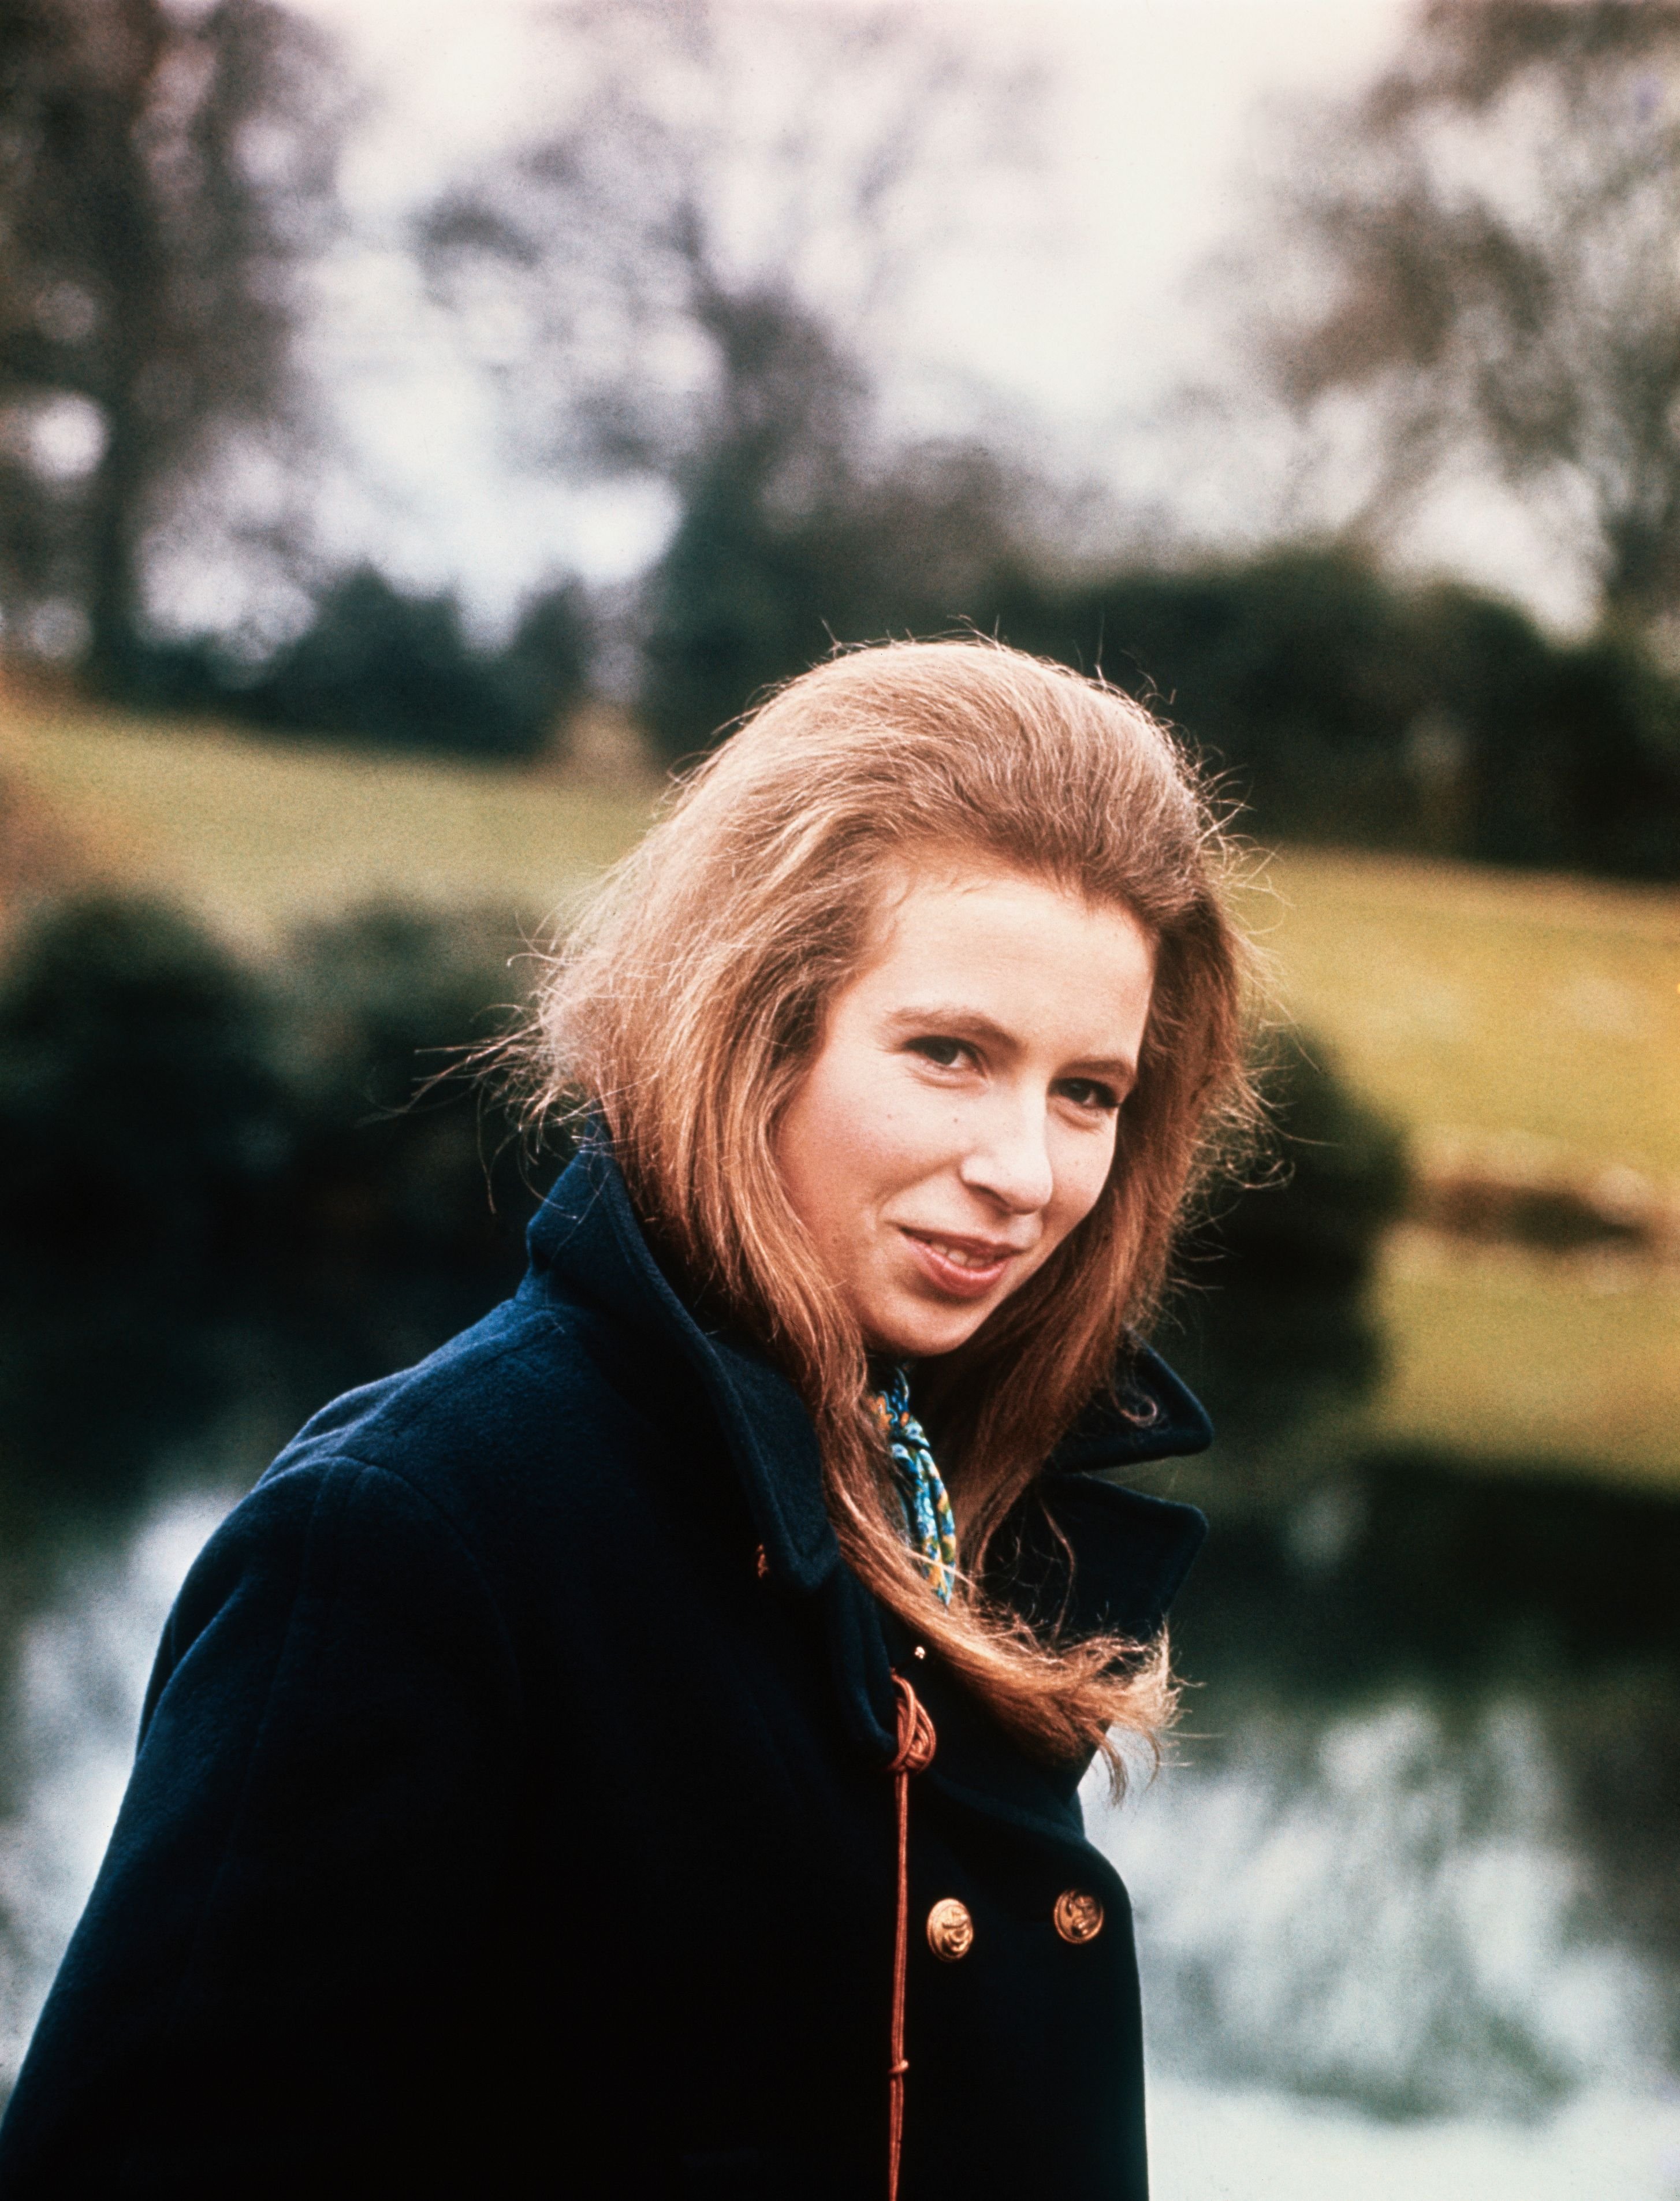 Princess Anne, 19, walking the grounds of Sandringham, the Royal Family's country residence. | Source: Getty Images